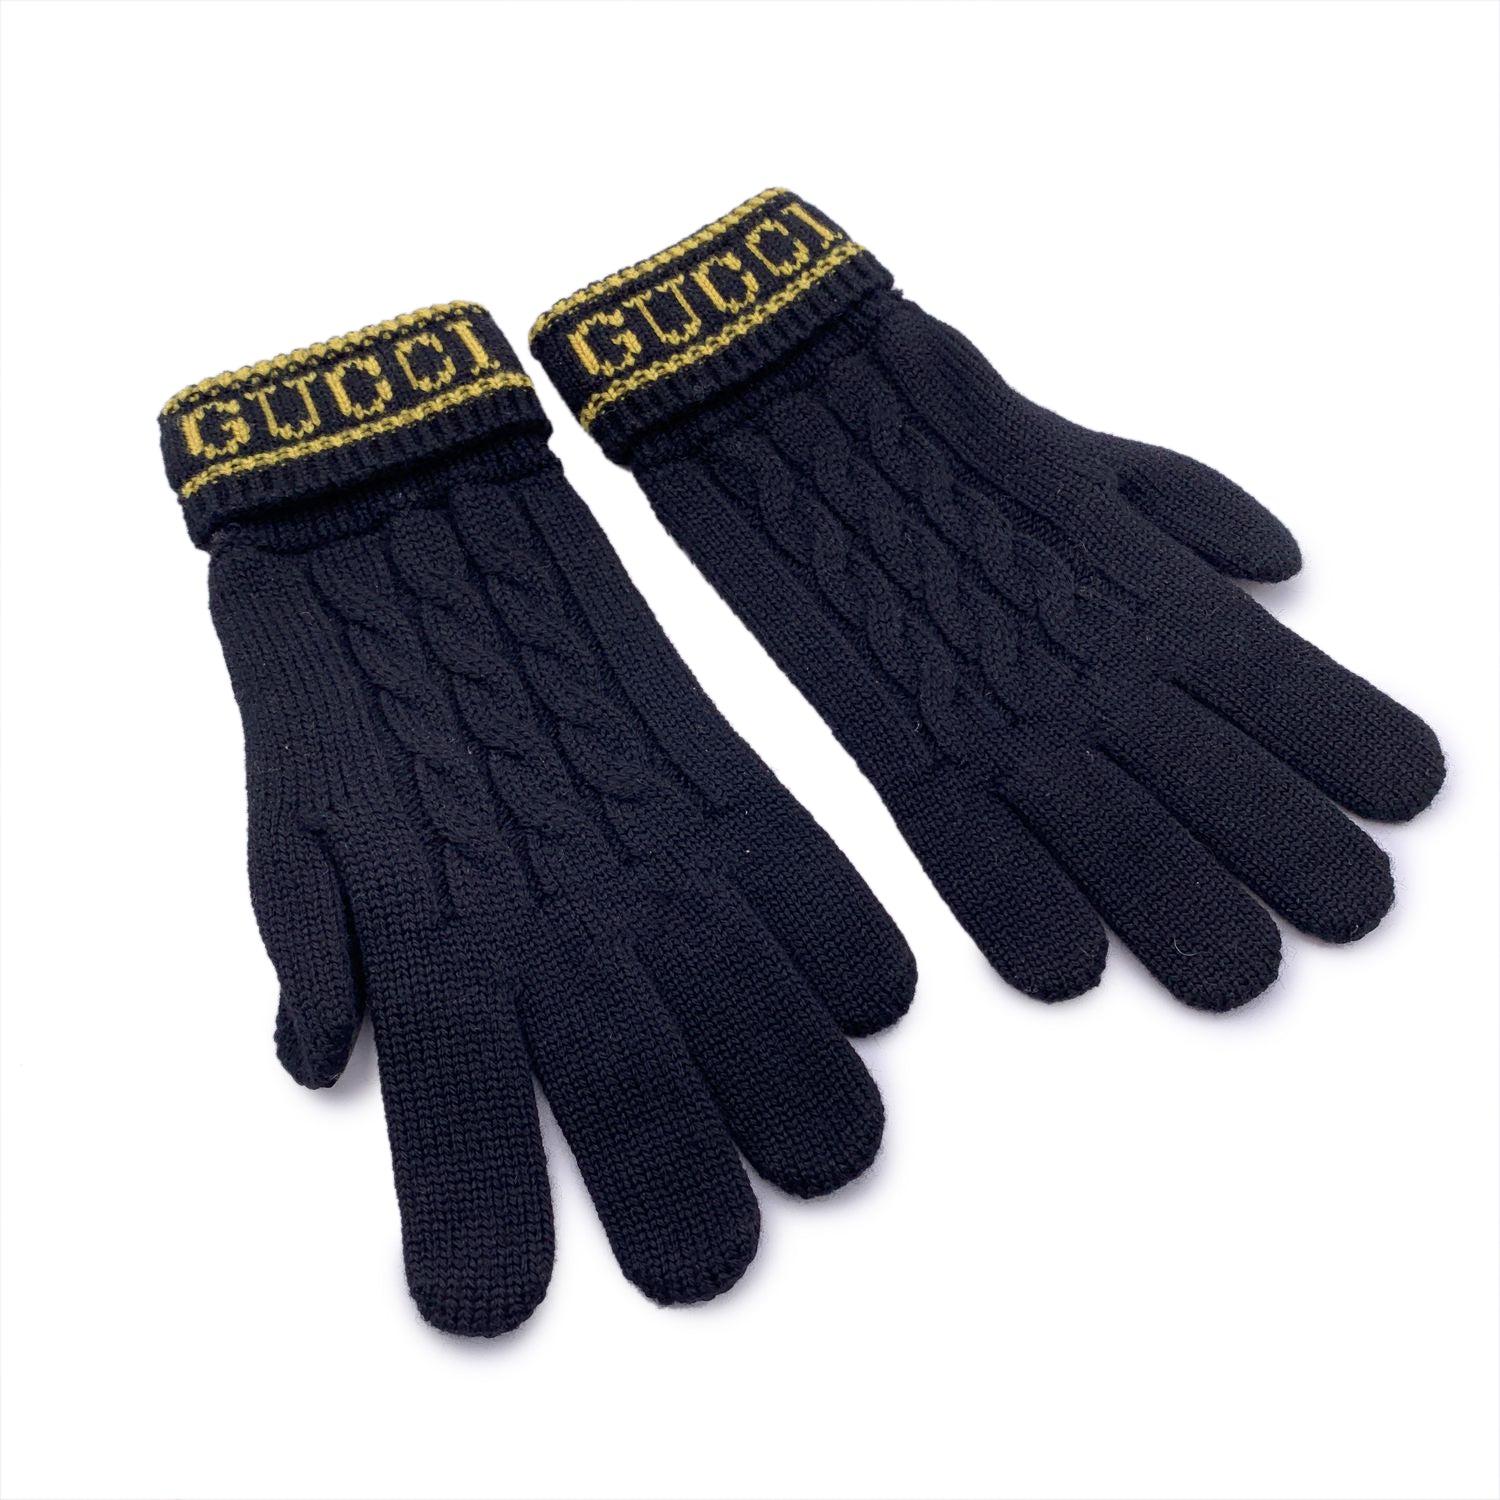 Beautiful and elegant knit gloves by Gucci. Black wool knit with yellow GUCCI signatures on the wrist. Leather side. Size M - 170/80 - 18,5 cm Details MATERIAL: Wool COLOR: Black MODEL: n.a. GENDER: Unisex Adults COUNTRY OF MANUFACTURE: Italy SIZE: